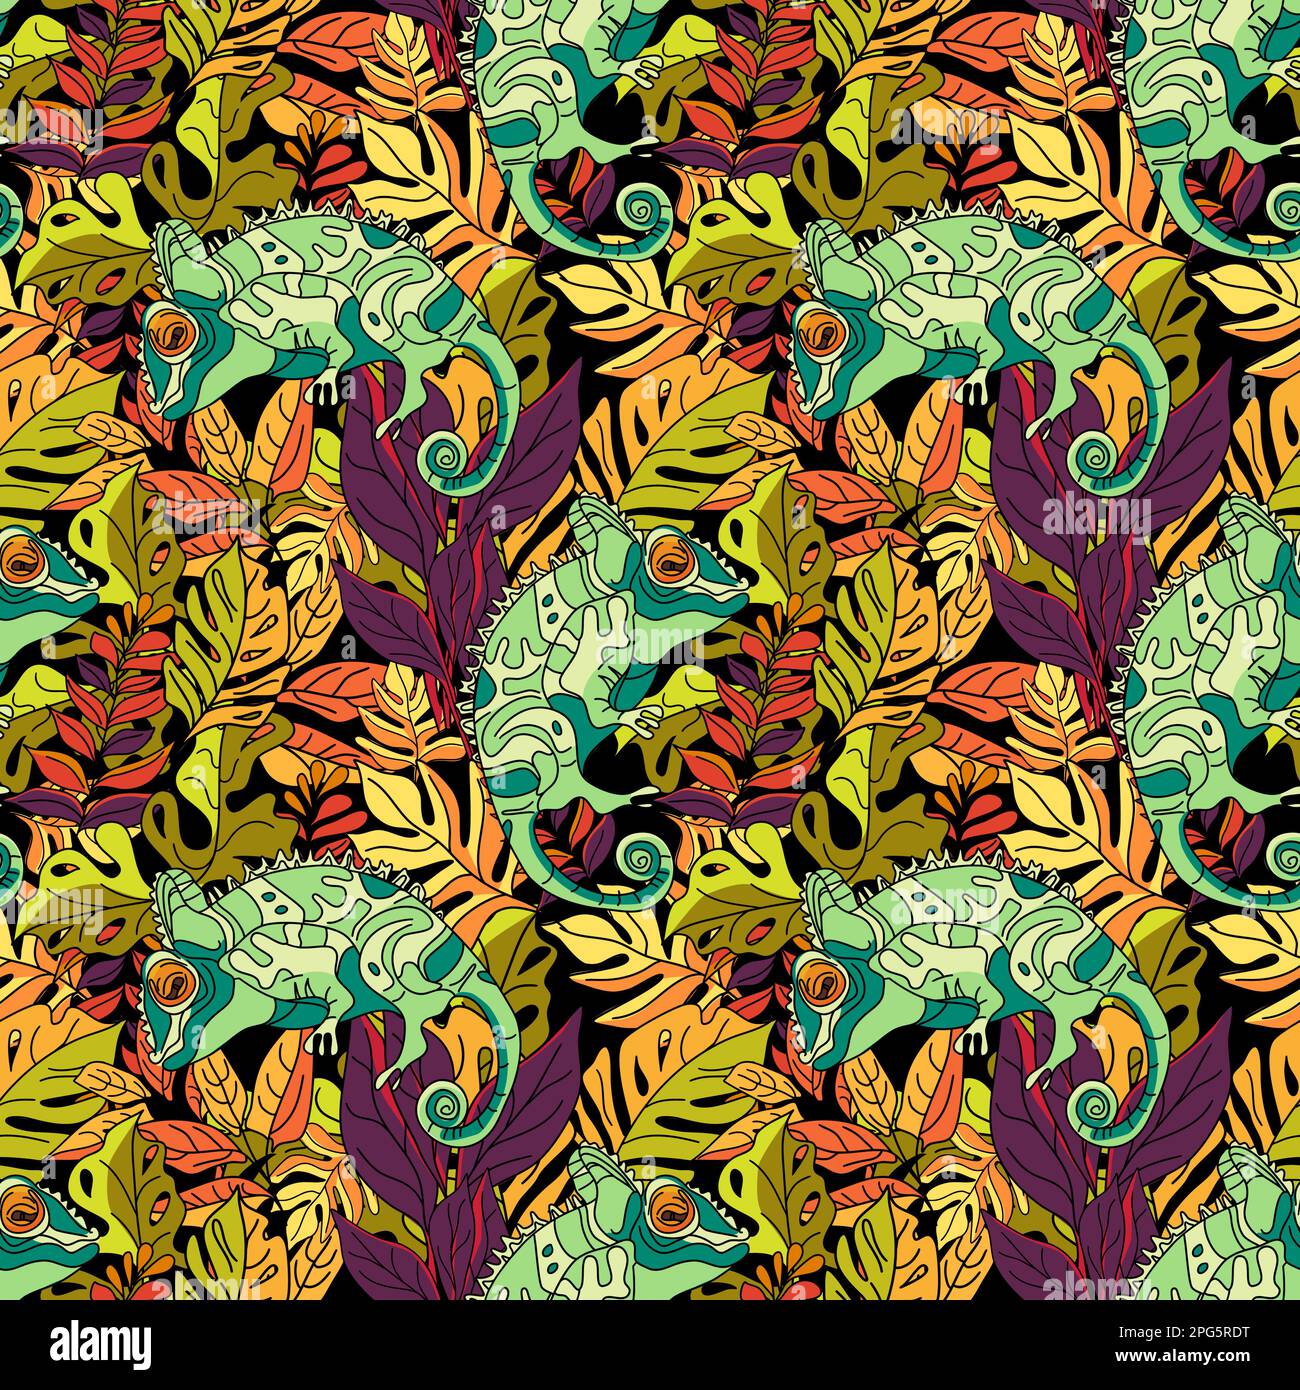 Seamless floral pattern with chameleons and tropical leaves vector illustration Stock Vector